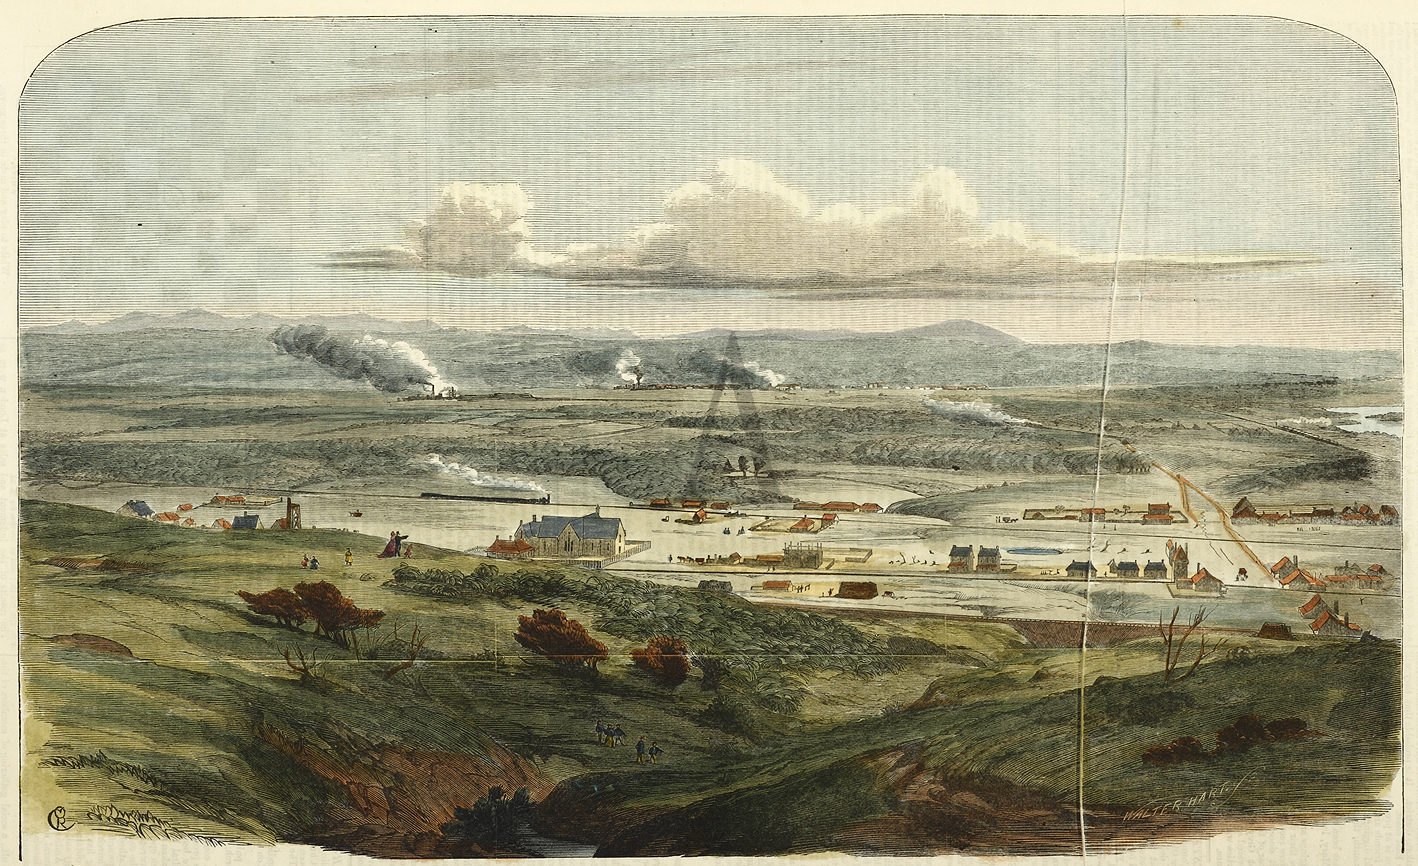 Newcastle Coal Fields, New South Wales. - Antique View from 1865